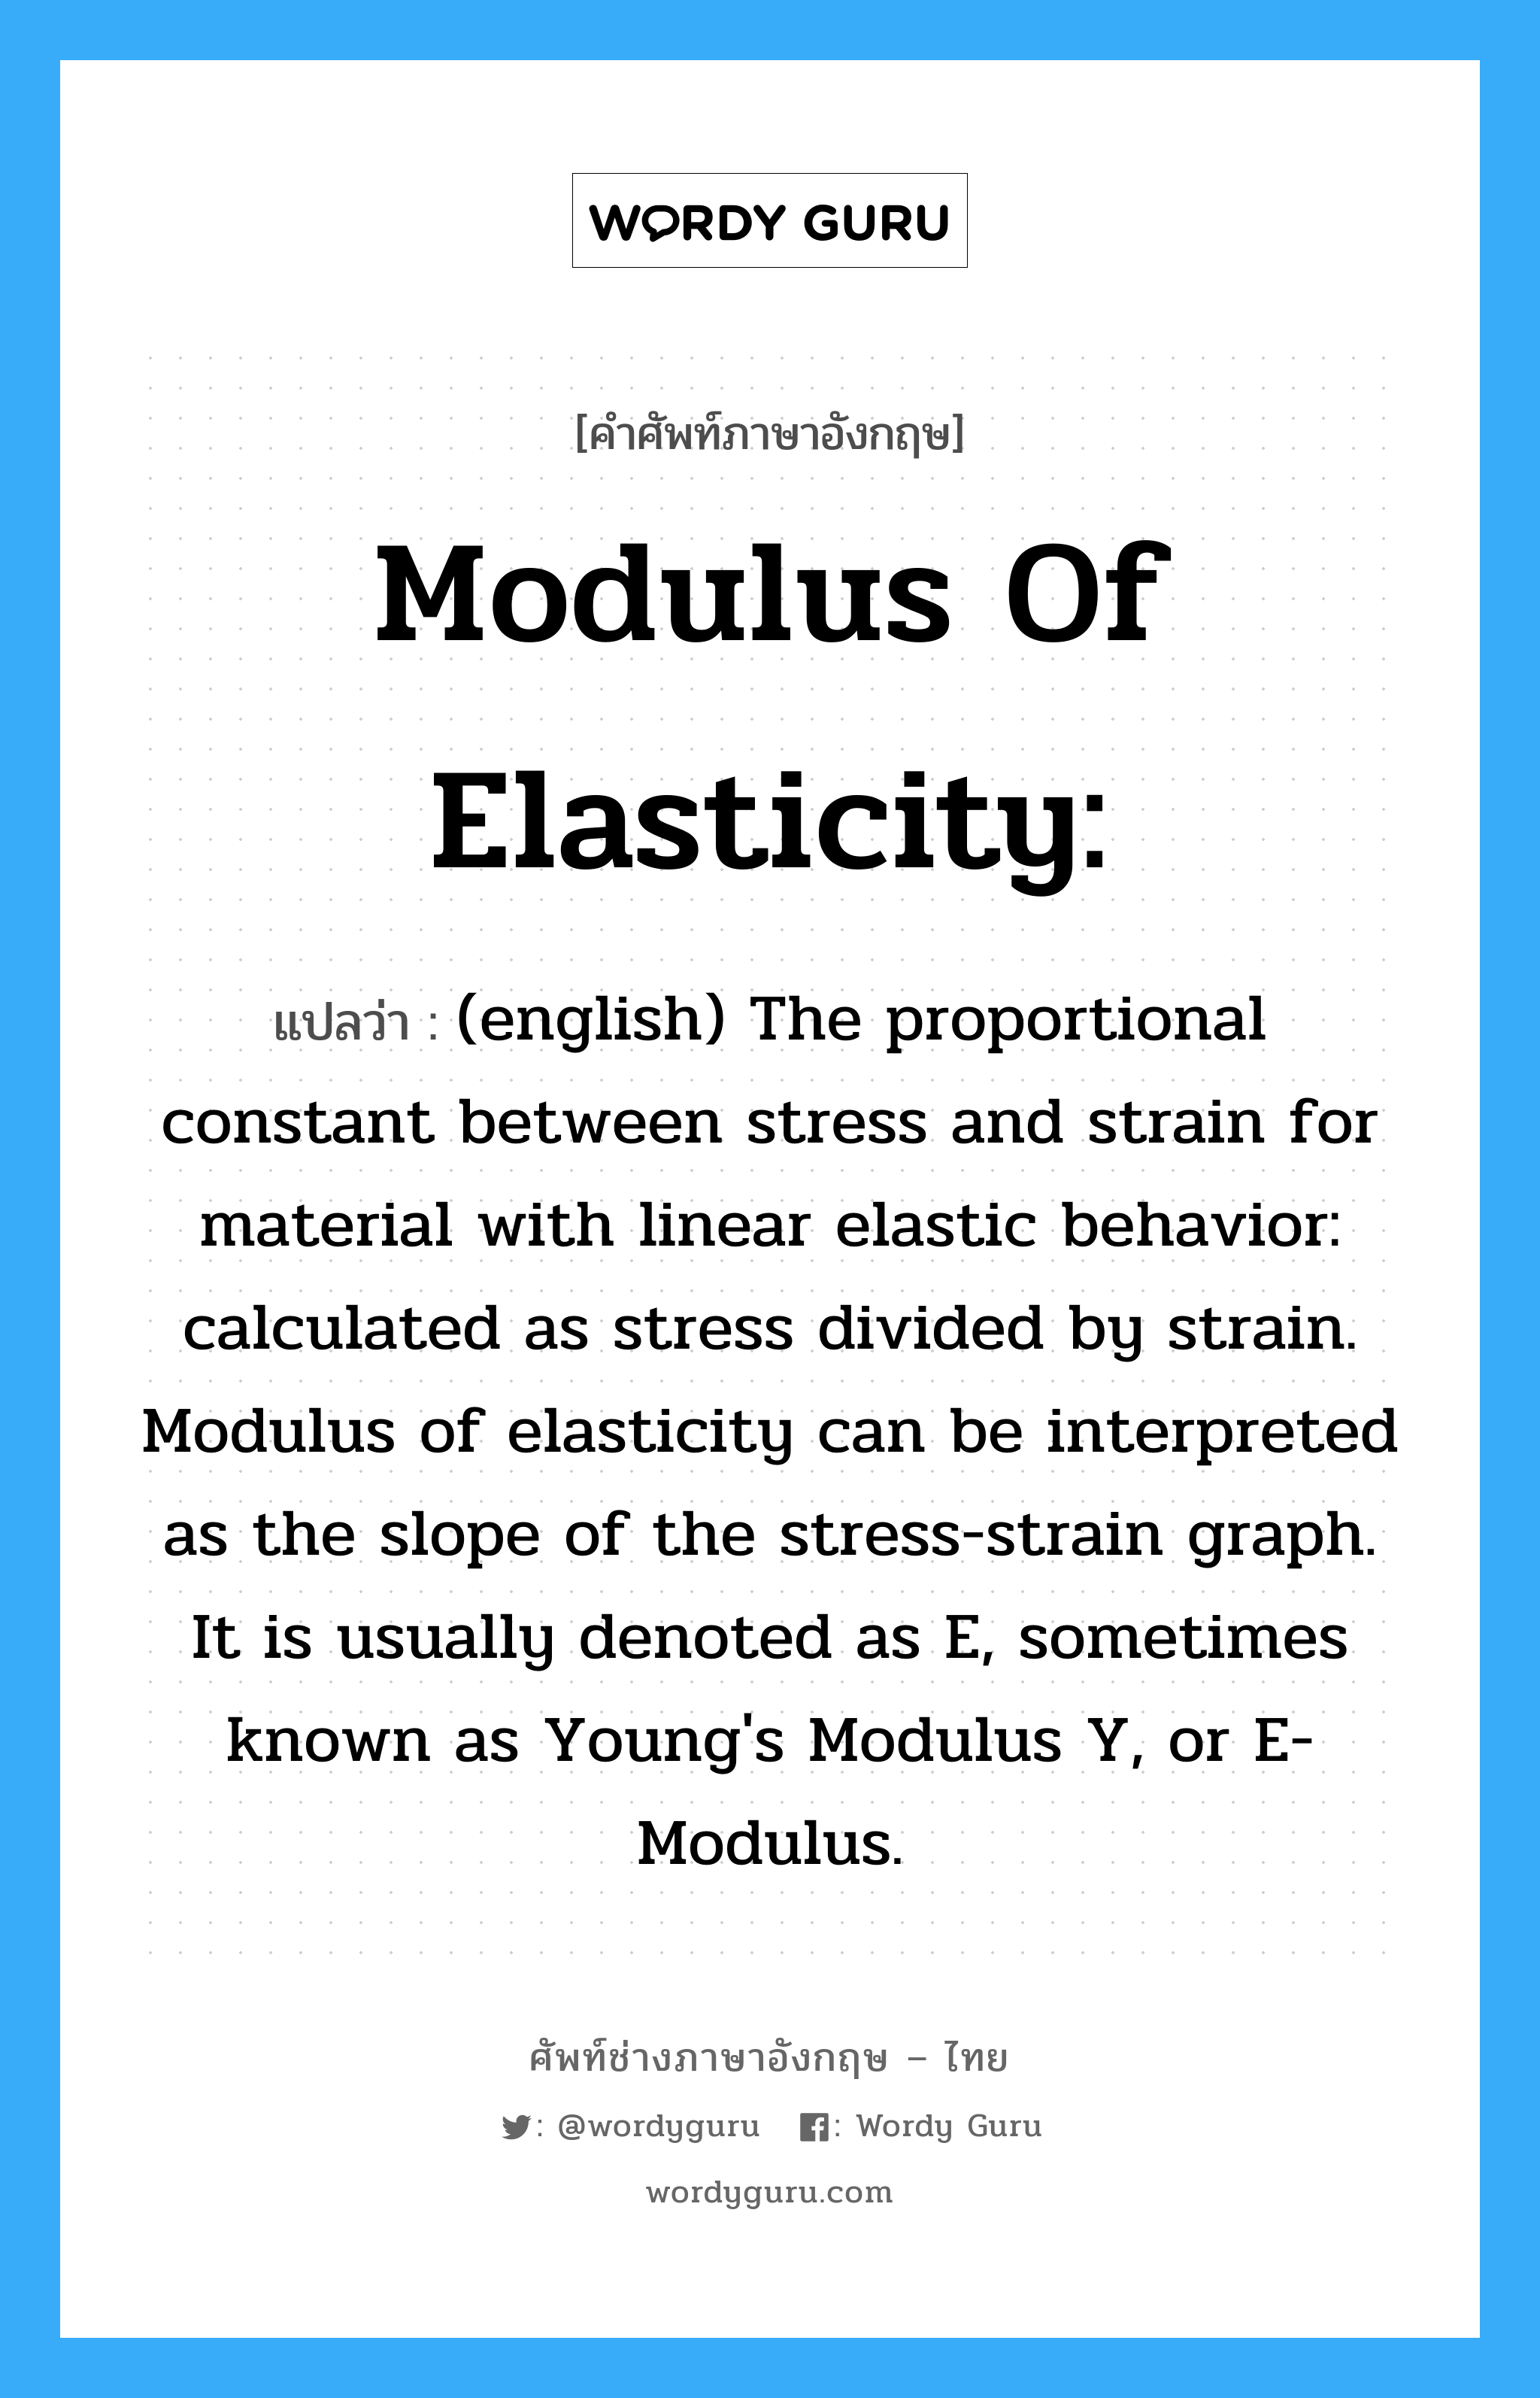 Modulus of elasticity: แปลว่า?, คำศัพท์ช่างภาษาอังกฤษ - ไทย Modulus of elasticity: คำศัพท์ภาษาอังกฤษ Modulus of elasticity: แปลว่า (english) The proportional constant between stress and strain for material with linear elastic behavior: calculated as stress divided by strain. Modulus of elasticity can be interpreted as the slope of the stress-strain graph. It is usually denoted as E, sometimes known as Young's Modulus Y, or E-Modulus.